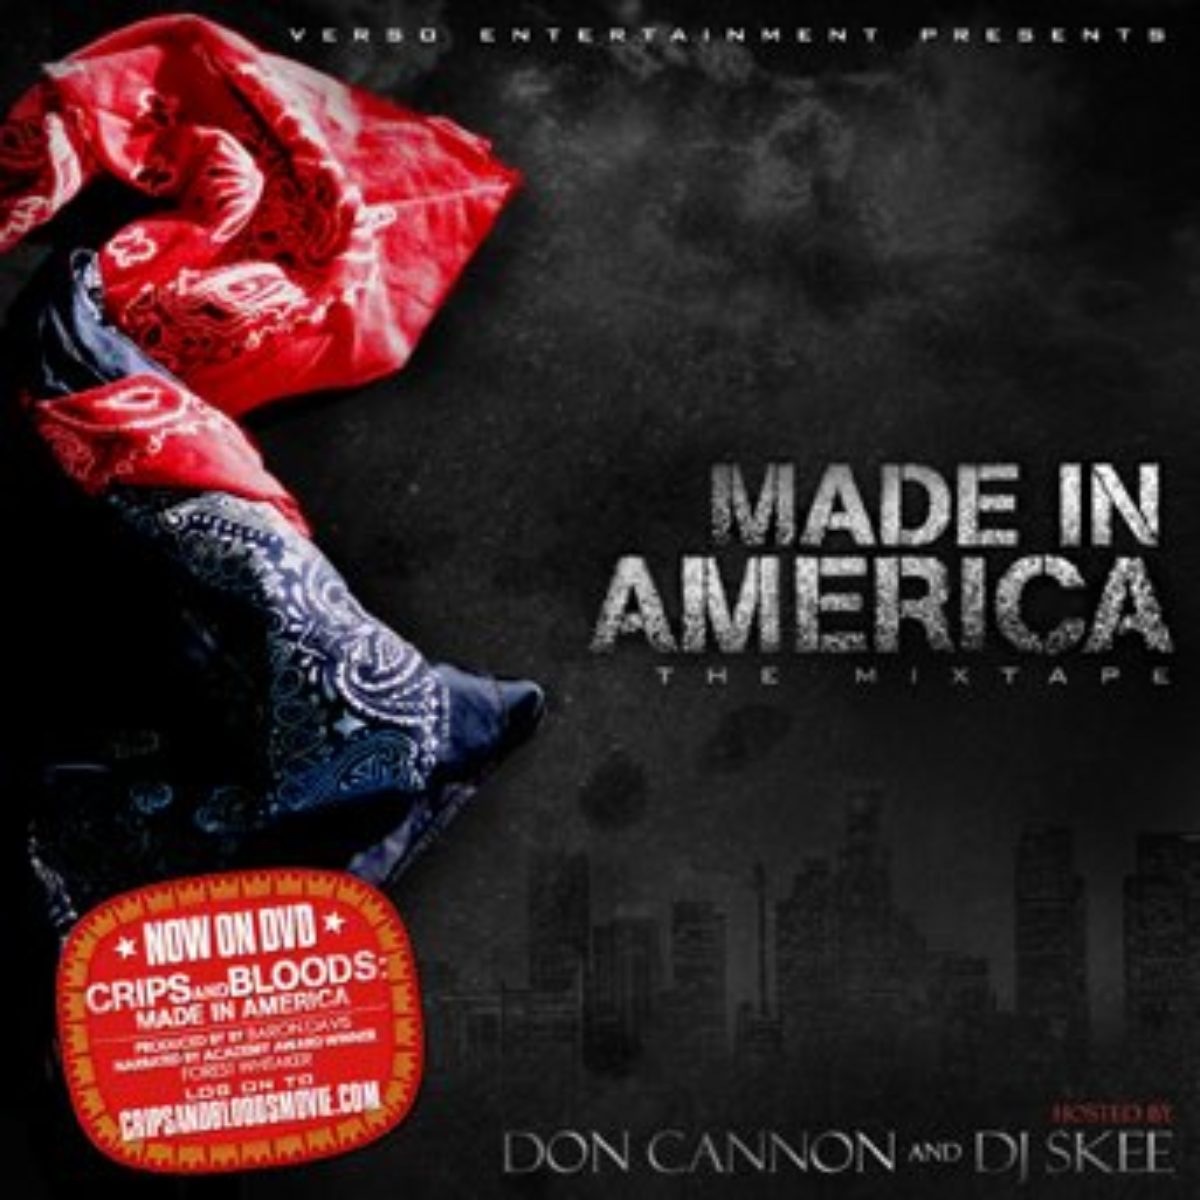 Crips and Bloods made in America. Made in America исполнители. Kam - made in America. Lil Wayne Bloods.